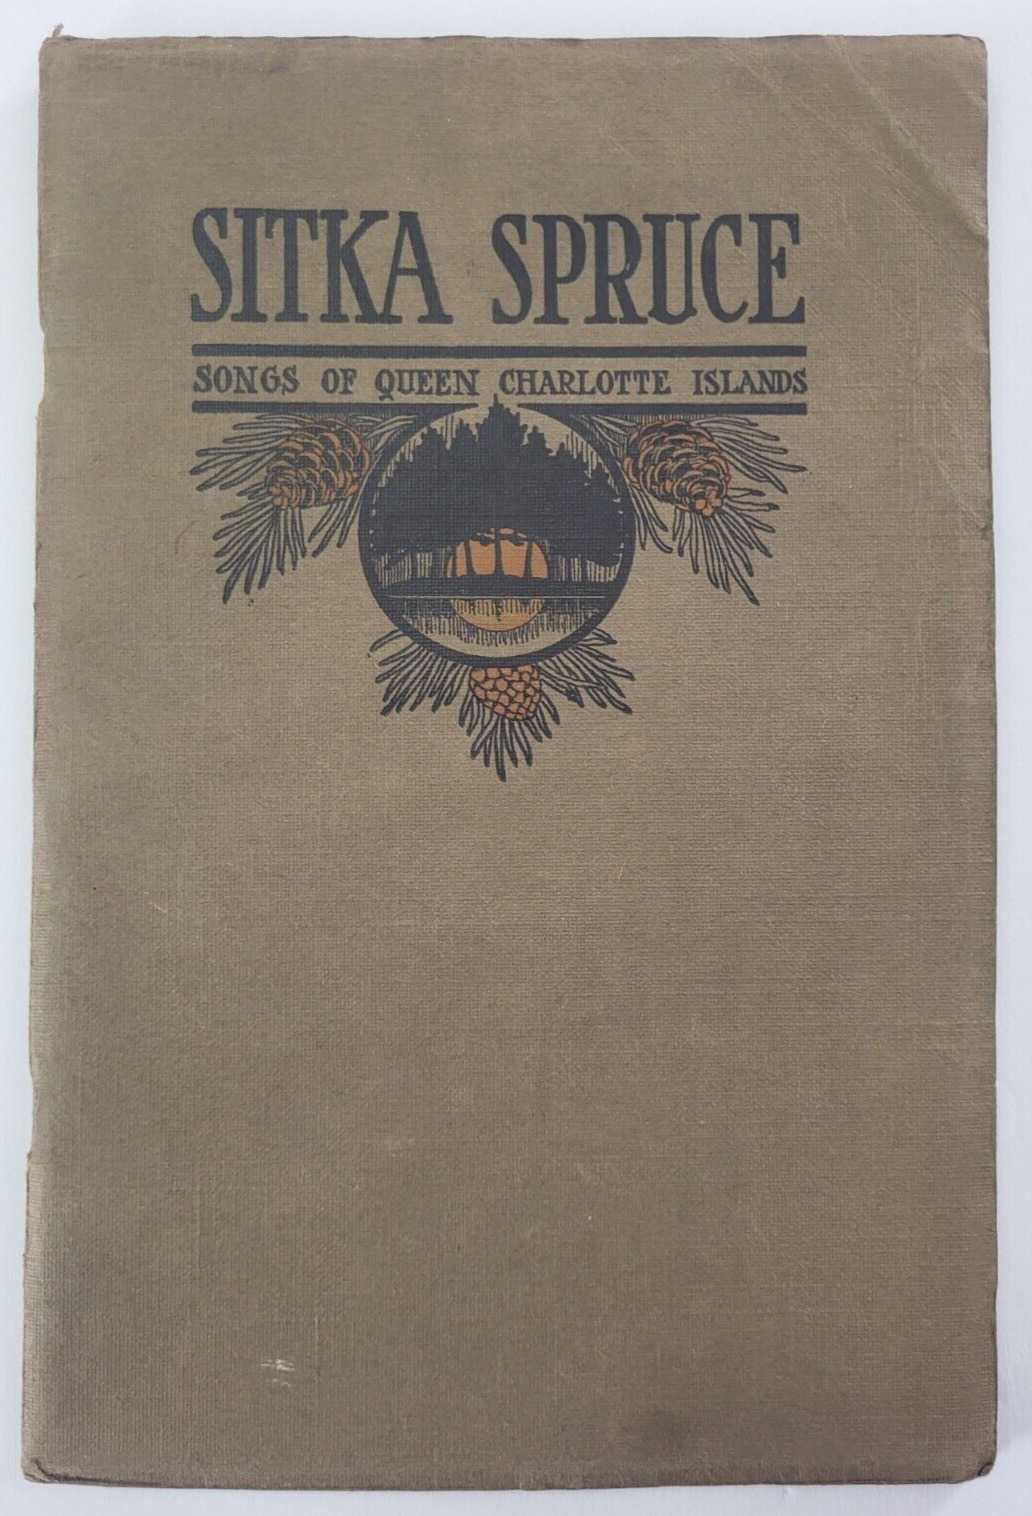 1919 Sitka Spruce Songs Of Queen Charlotte Islands D.E. Hatt Vancouver BC Canada